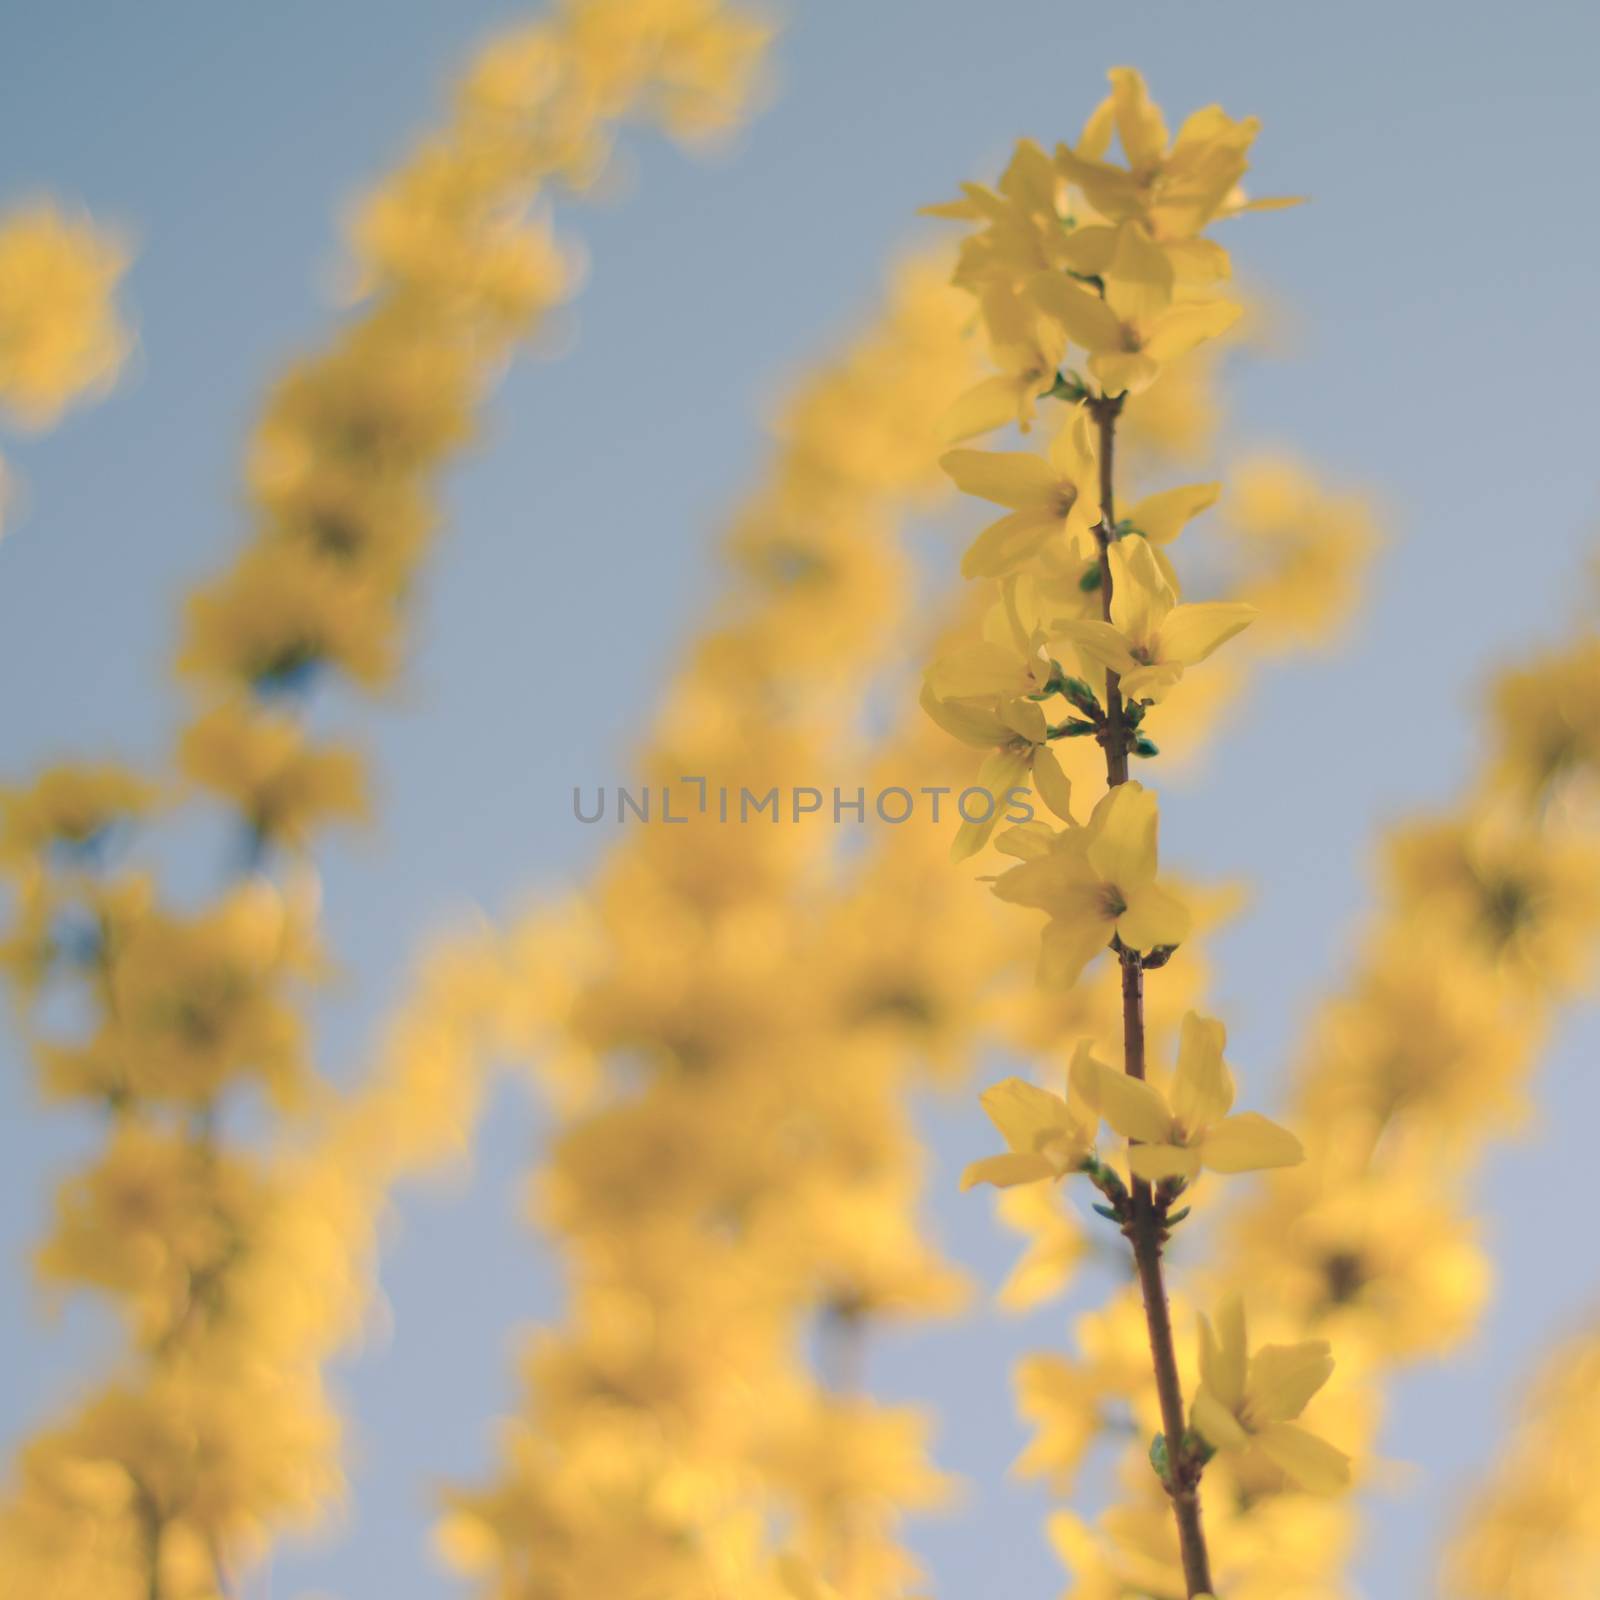 Pastel Retro Filter Yellow Blossom Flowers For Spring (With Shallow DoF)